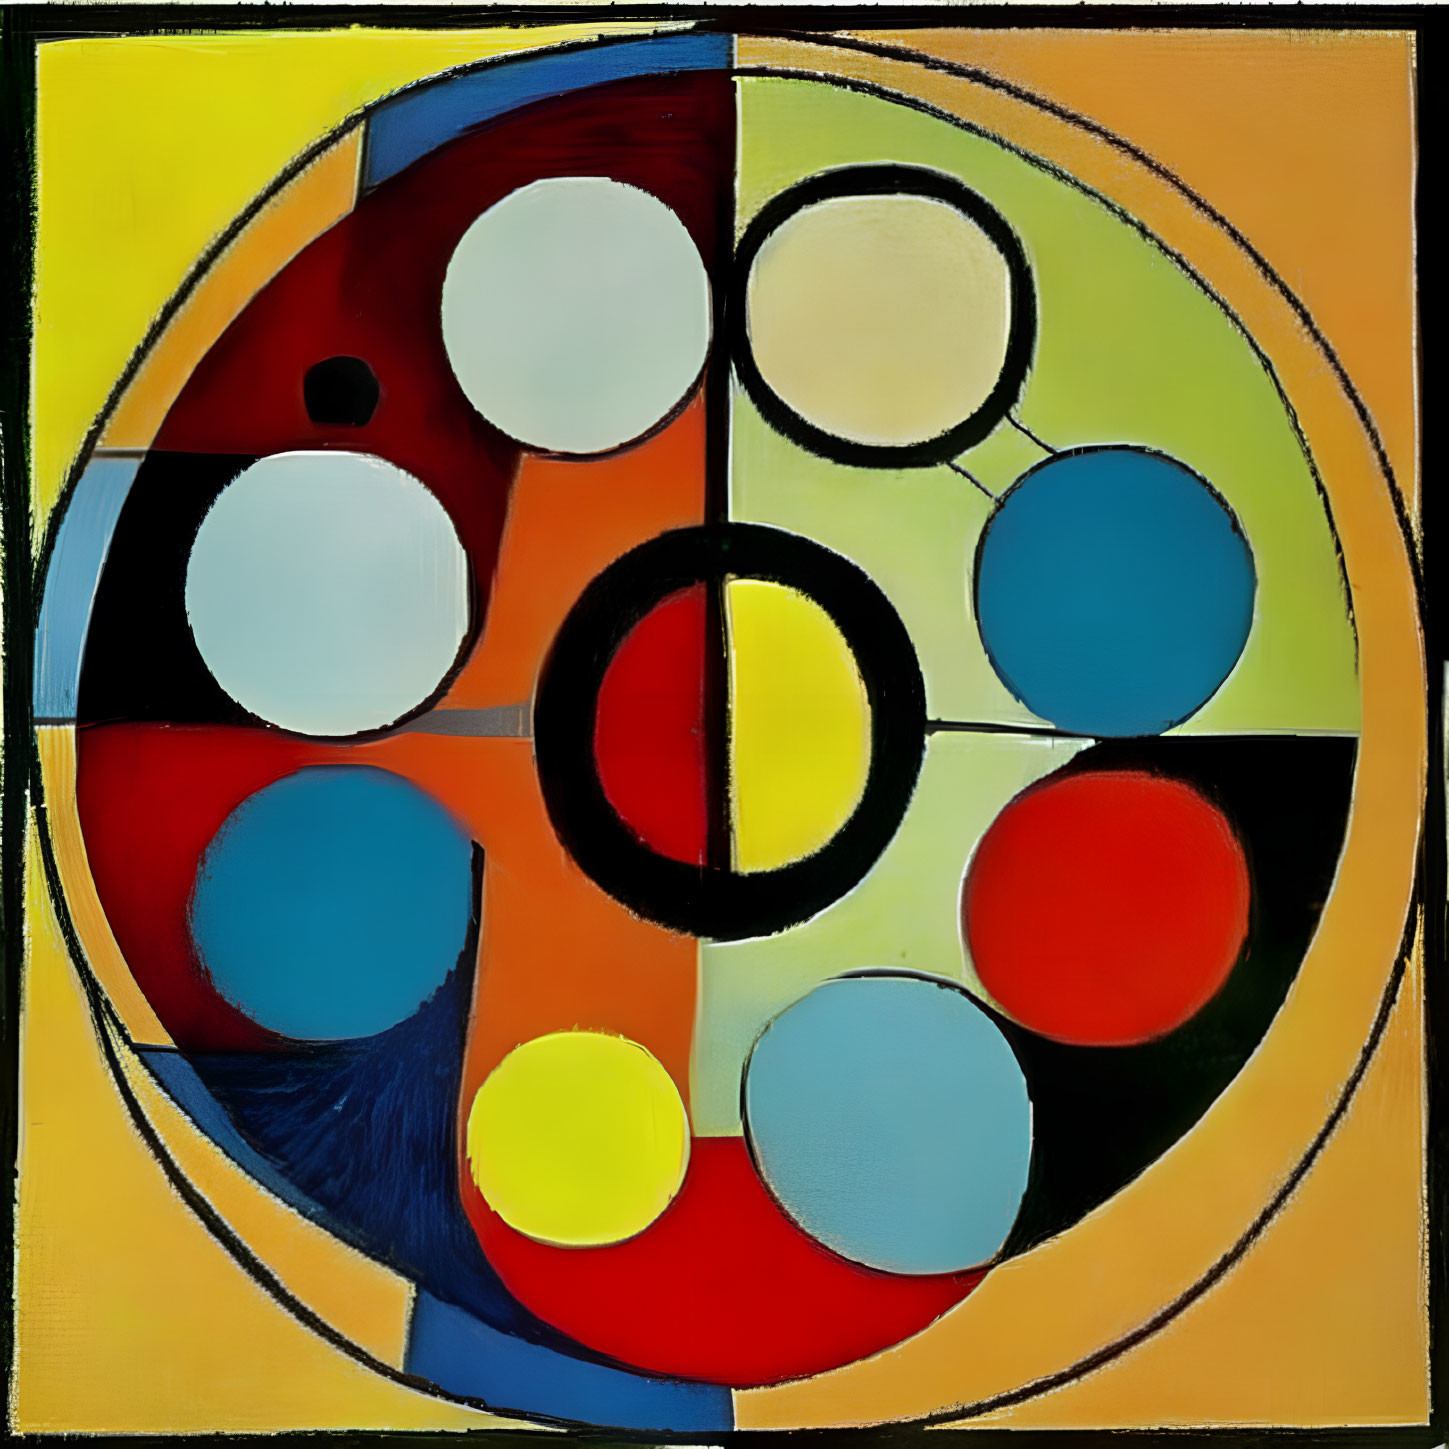 Vibrant abstract geometric painting with circular and curved shapes